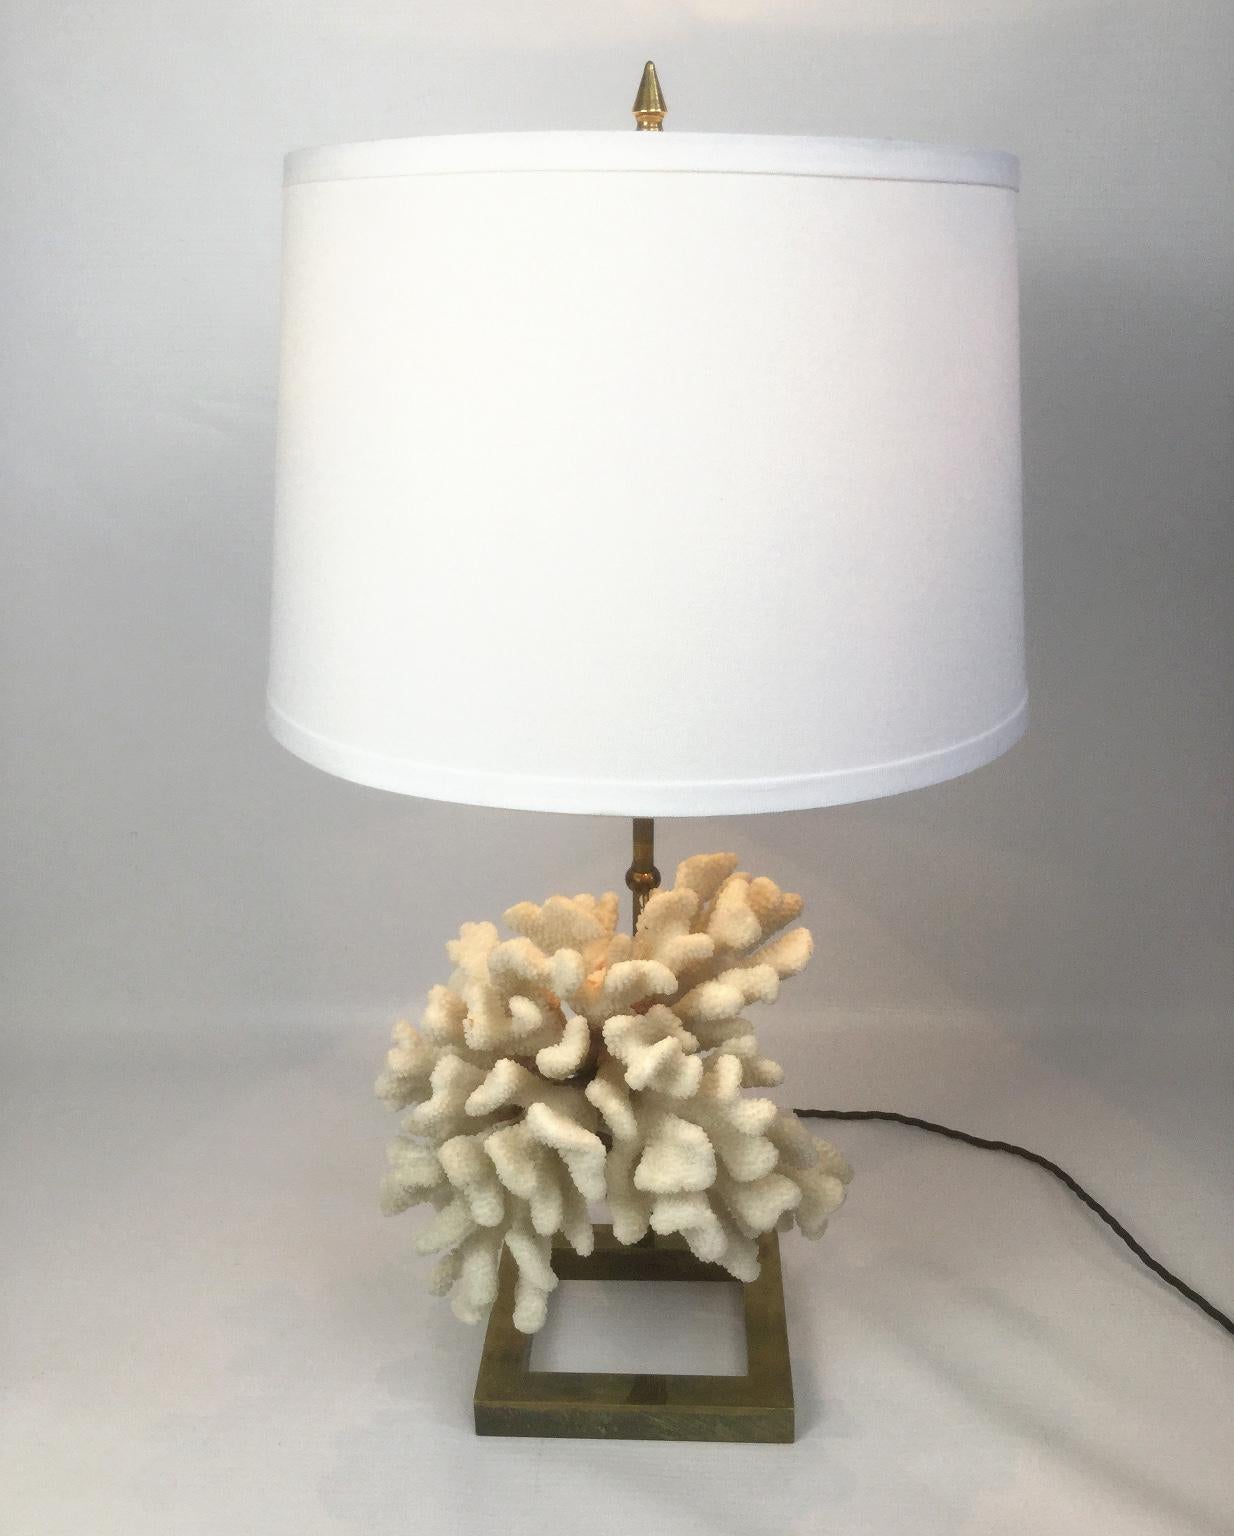 Natural white coral table lamp supported by a brass frame
Rewired with black cotton-insulated cable.